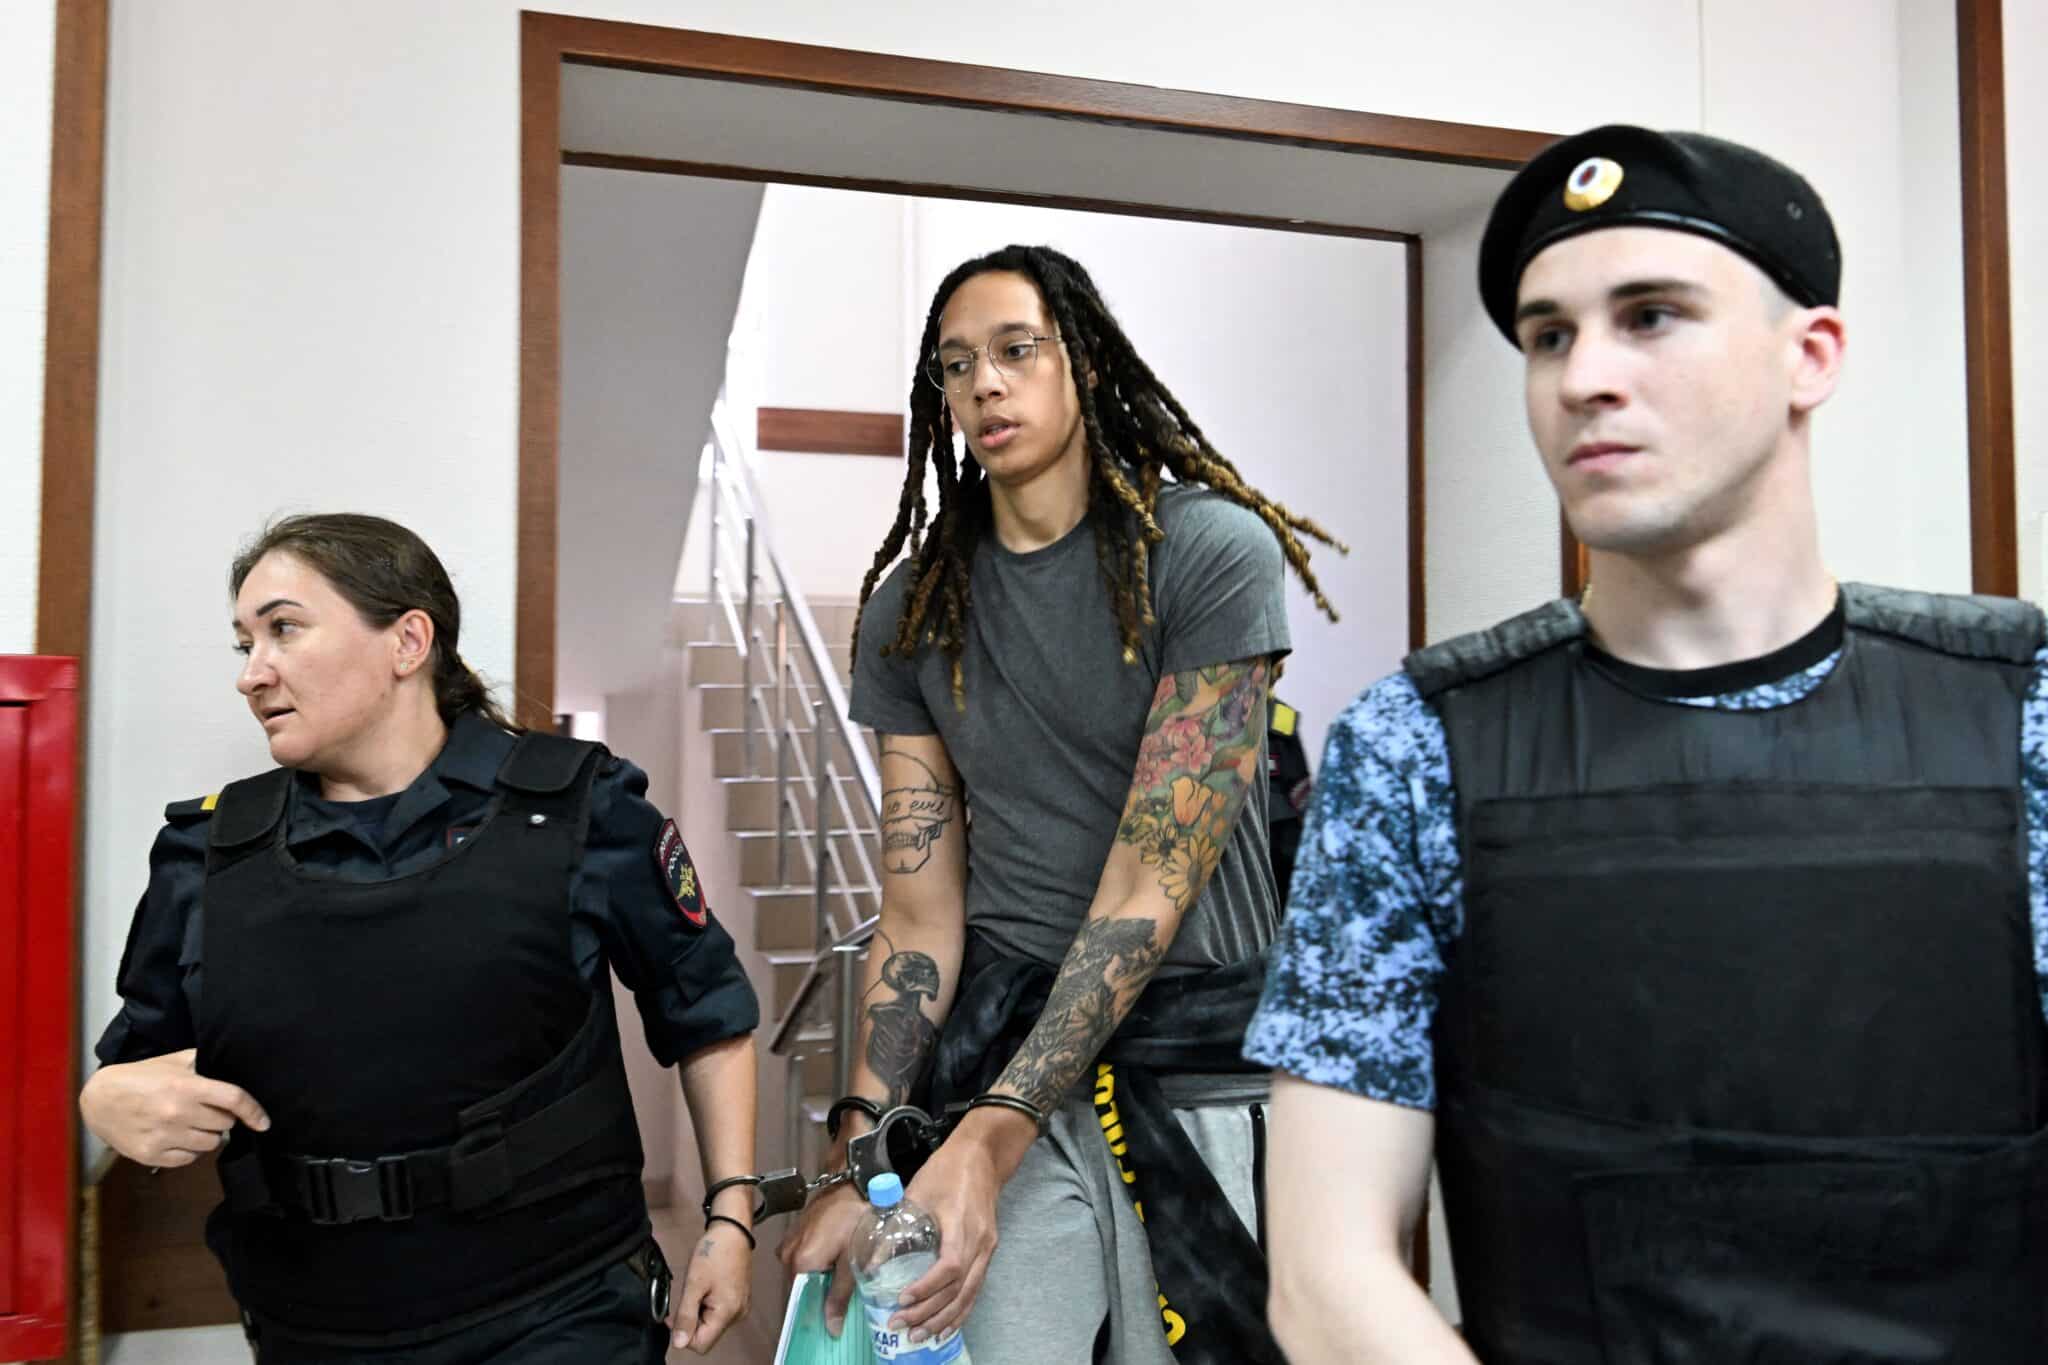 Brittney Griner arrives to a hearing at the Khimki Court, outside Moscow on June 27, 2022.